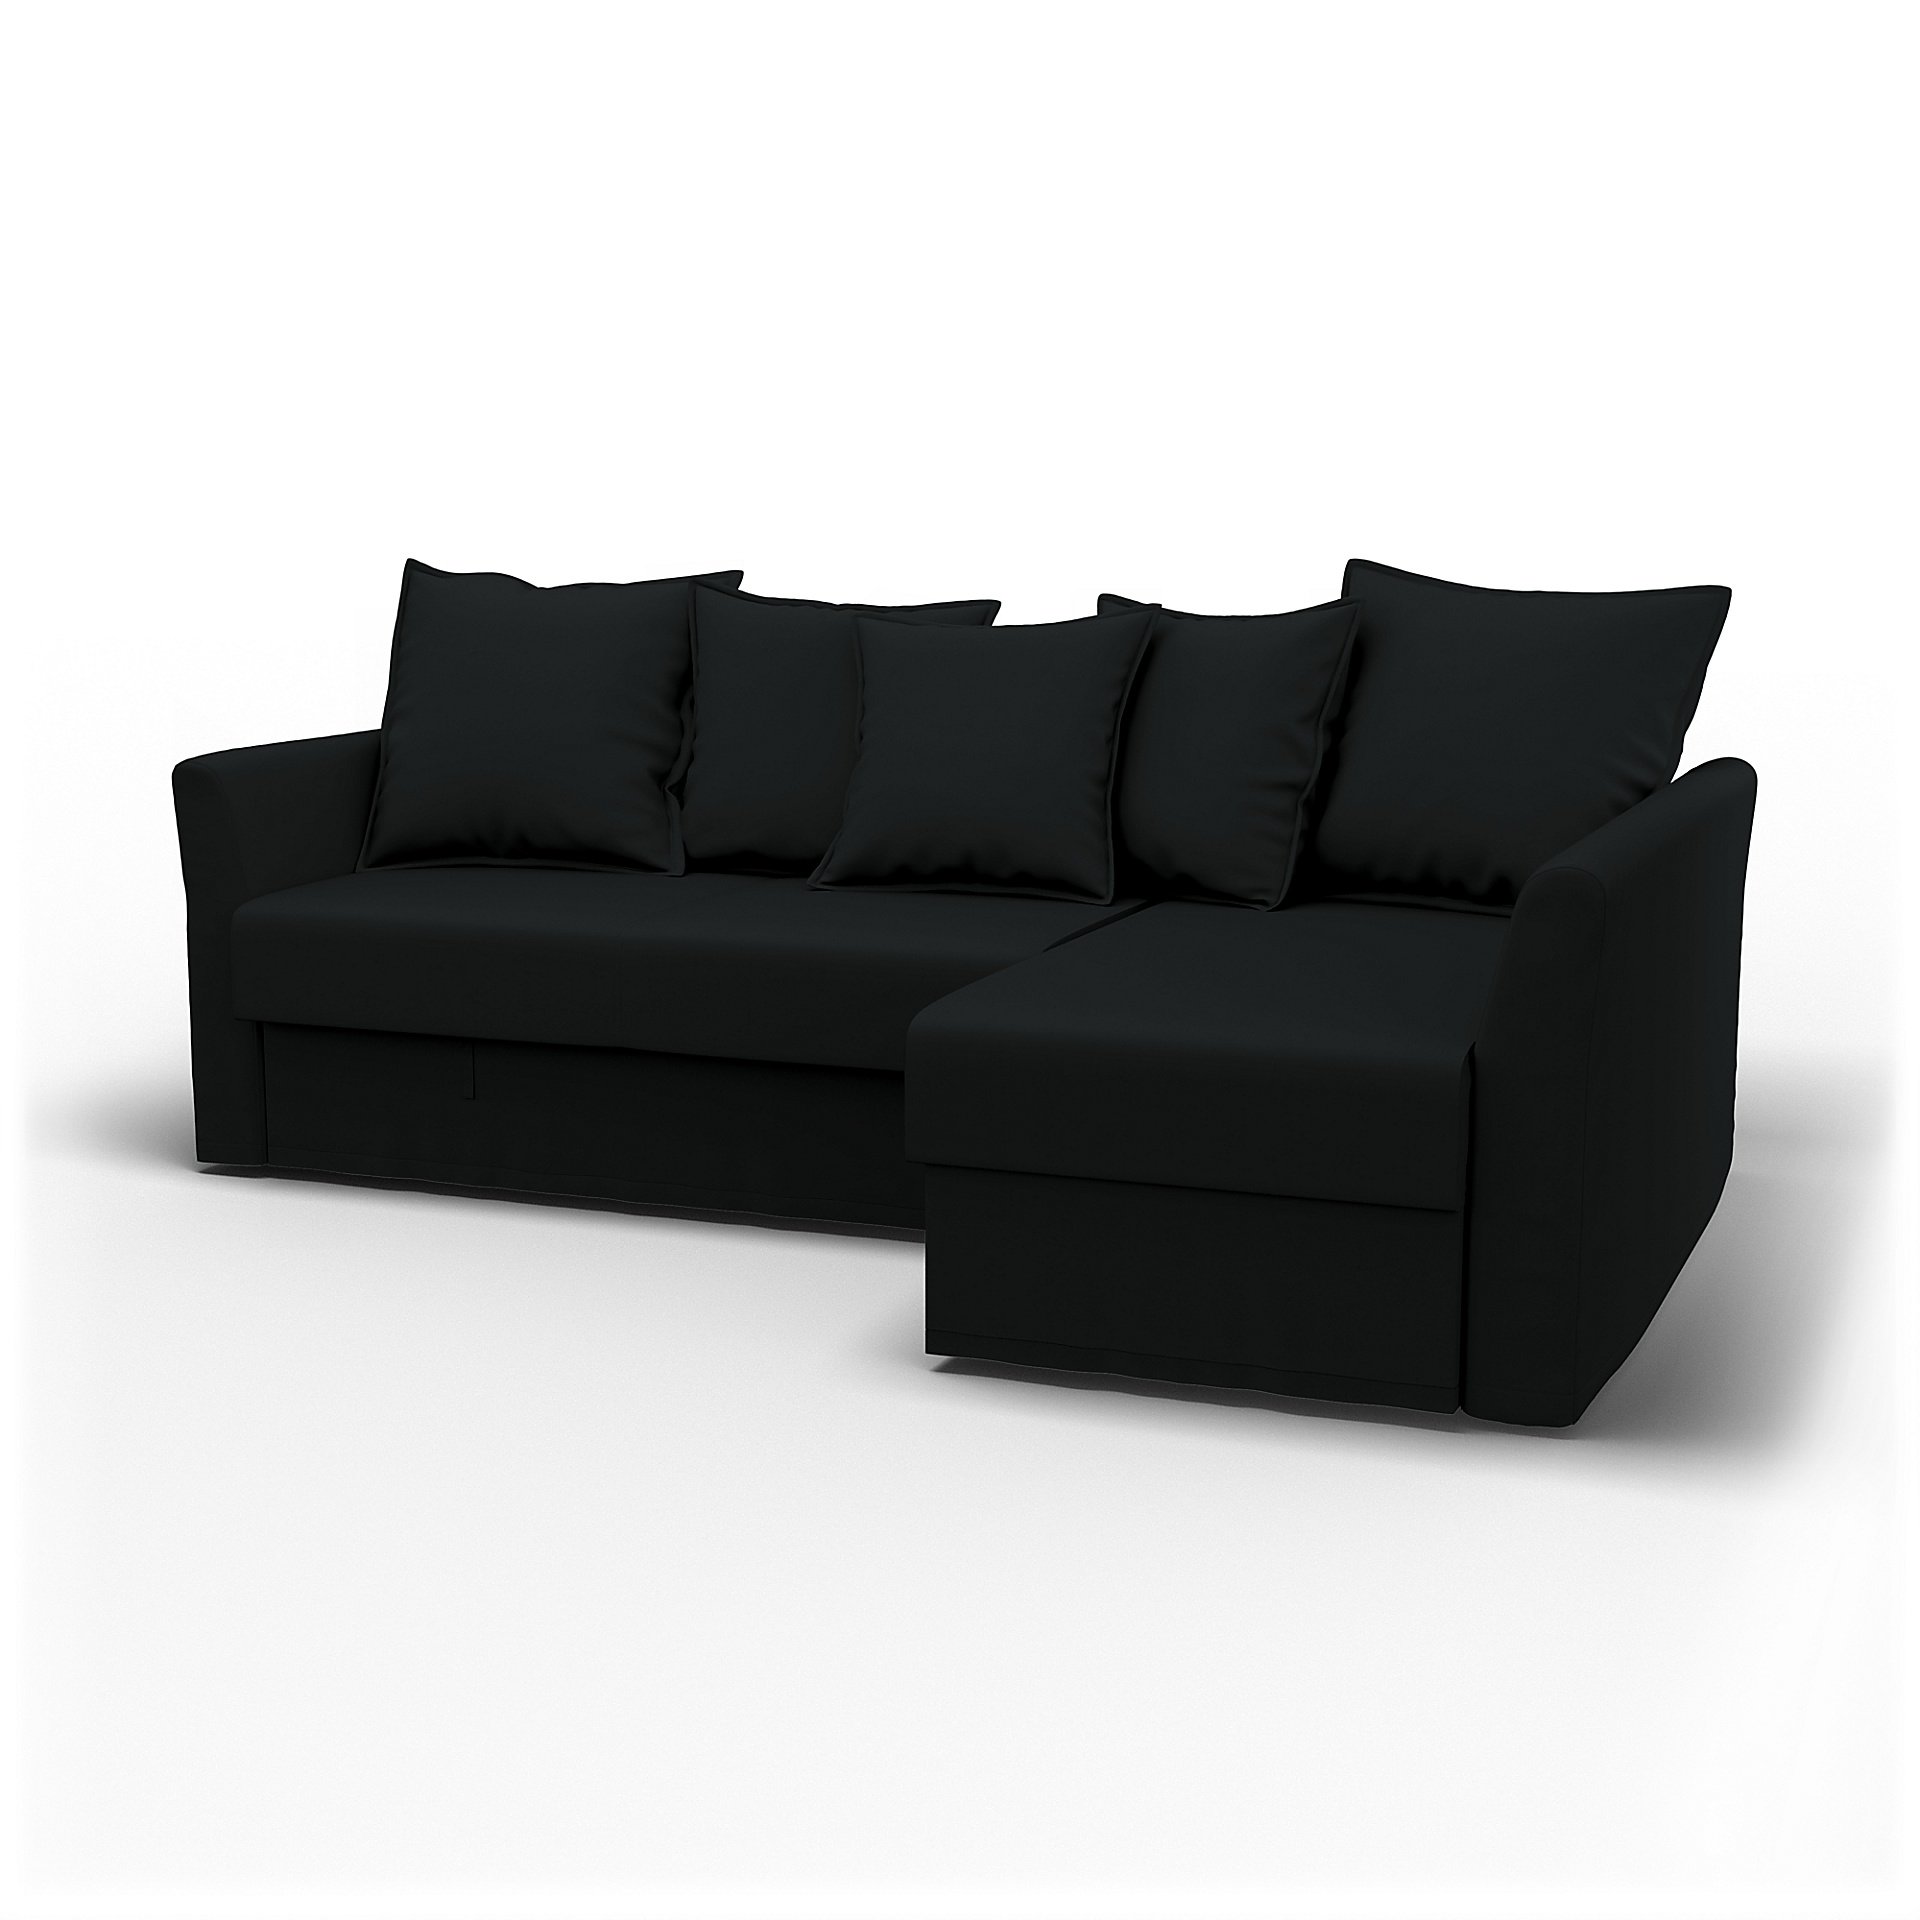 IKEA - Holmsund Sofabed with Chaiselongue, Jet Black, Cotton - Bemz